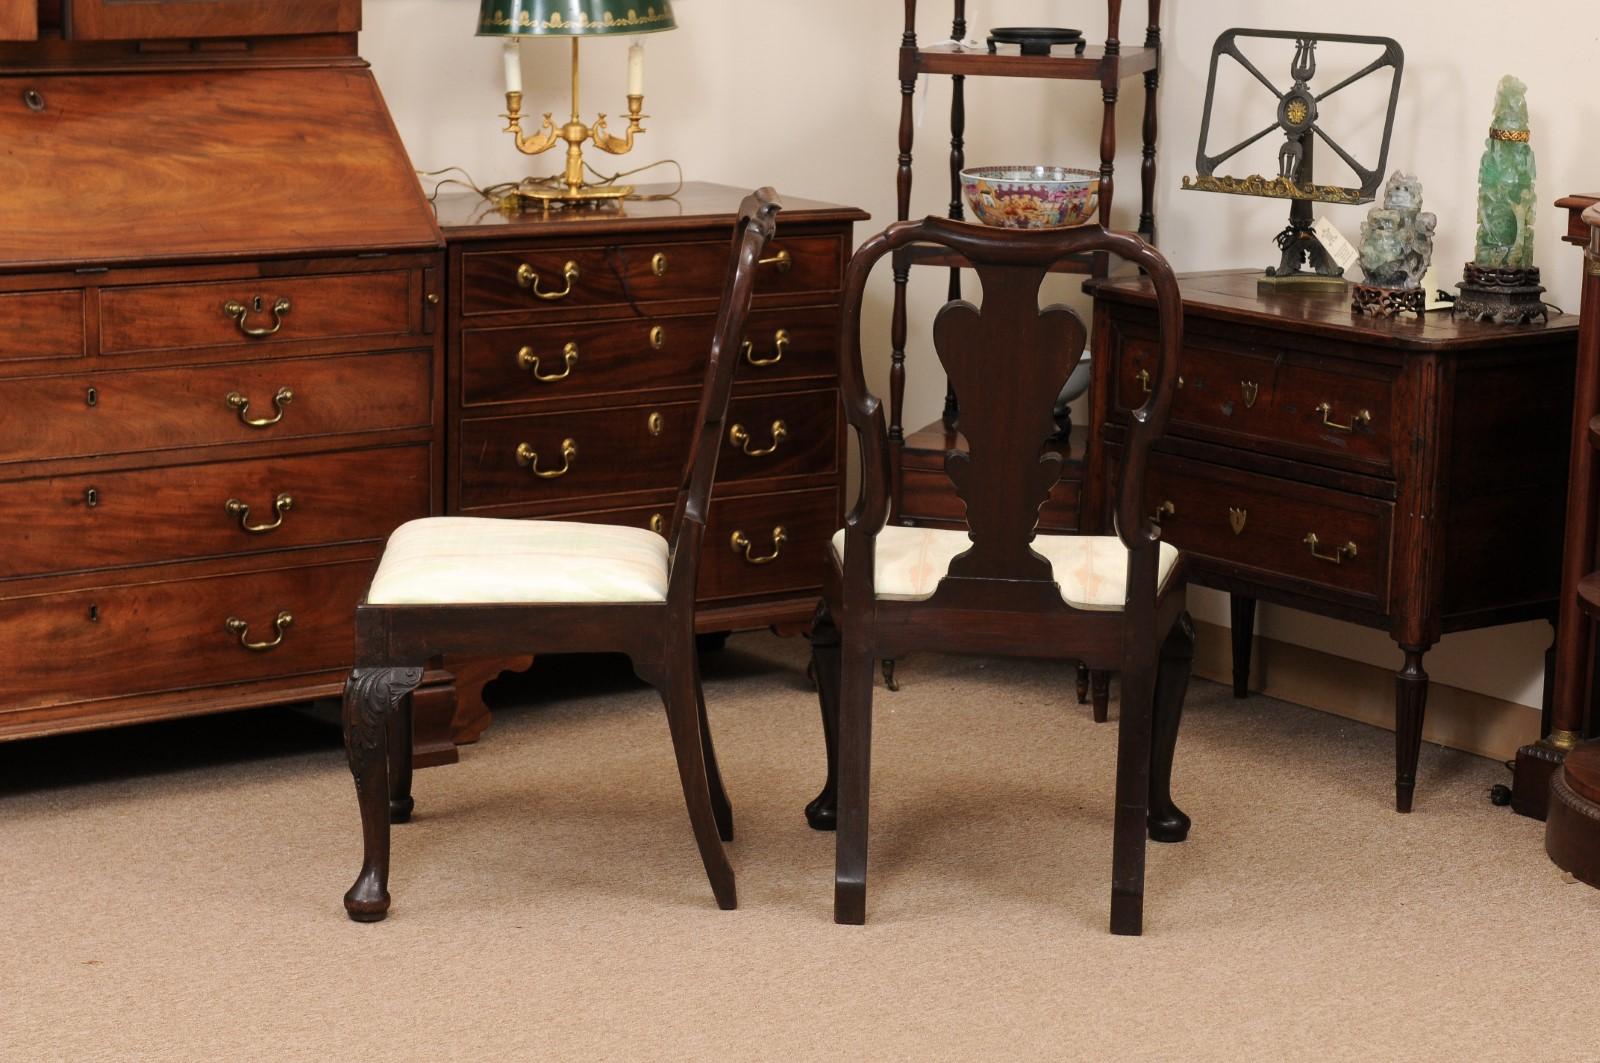 Pair of Queen Anne Walnut Side Chairs, 18th Century England For Sale 6